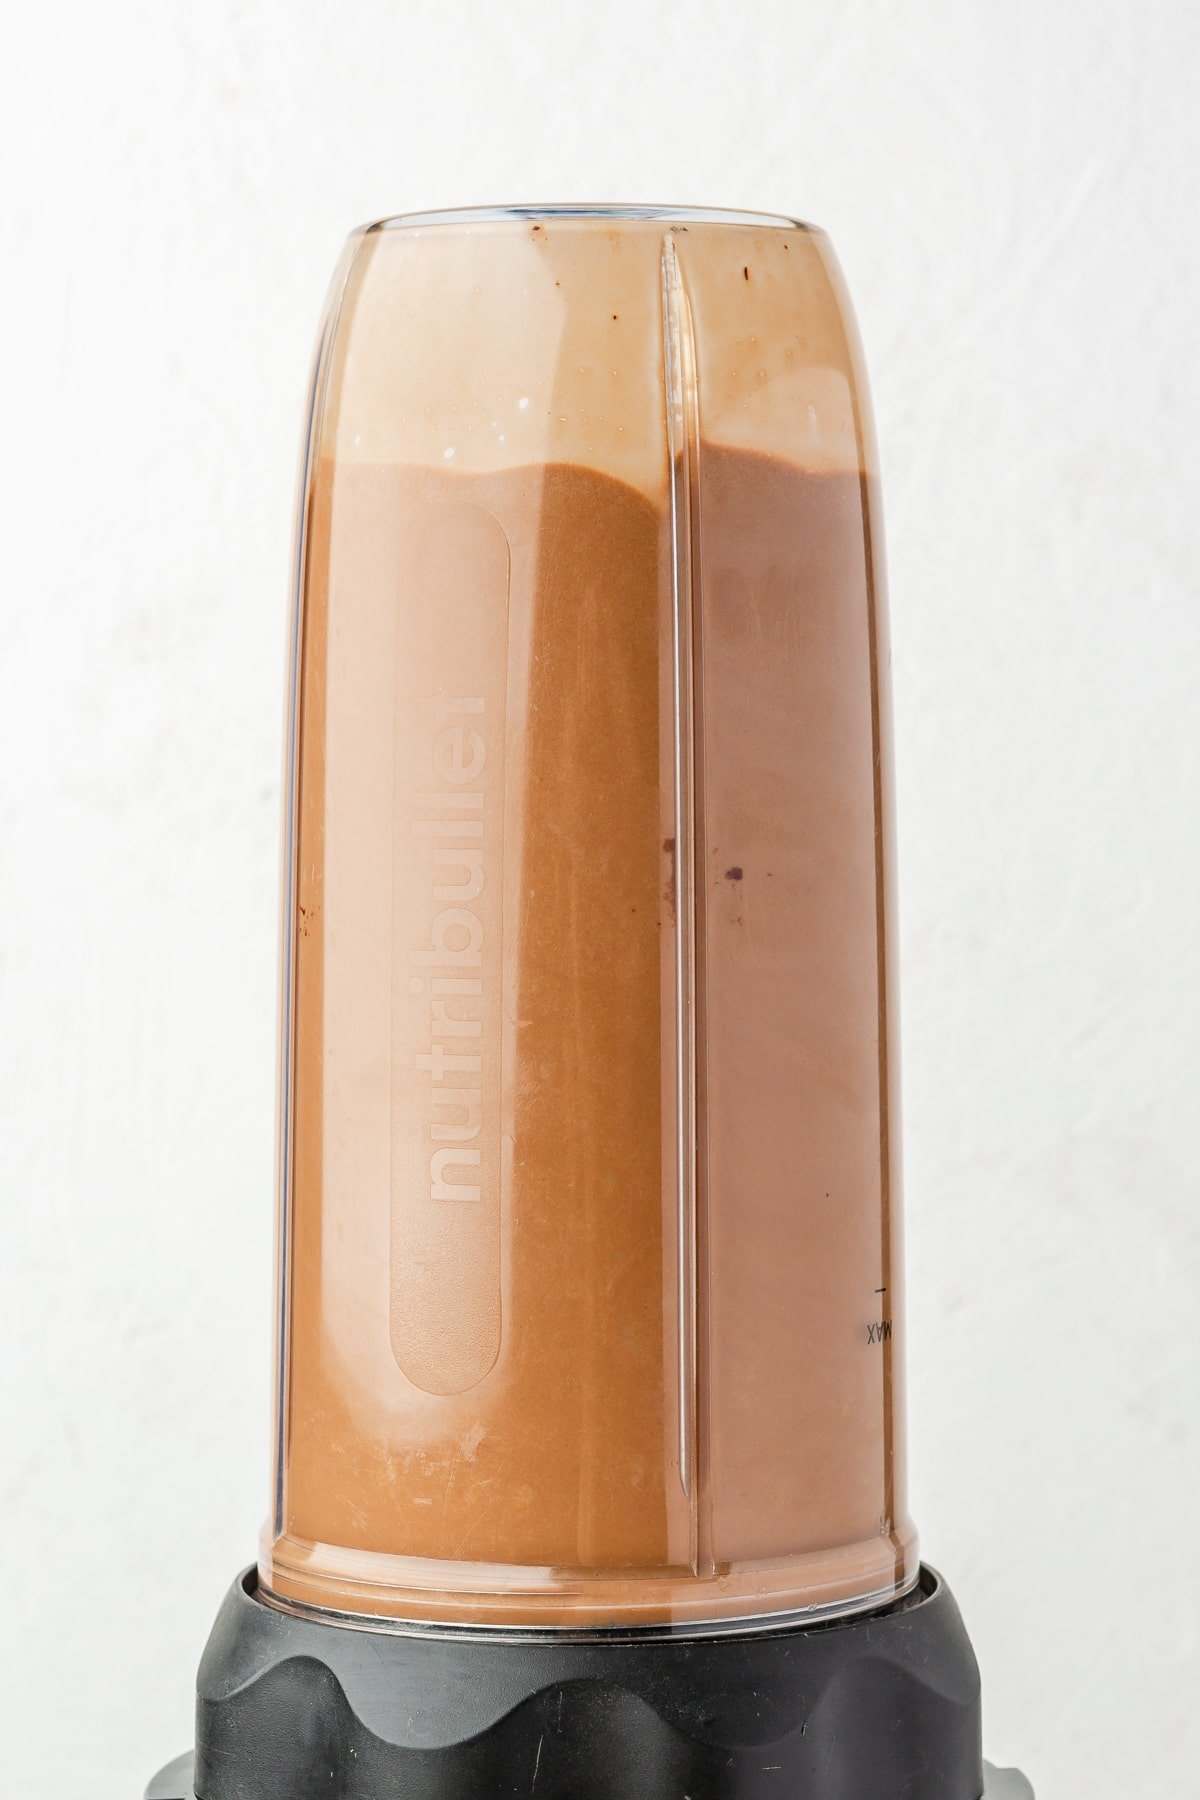 Cocoa powder and gelatin blended in a Nutribullet style individual blender.